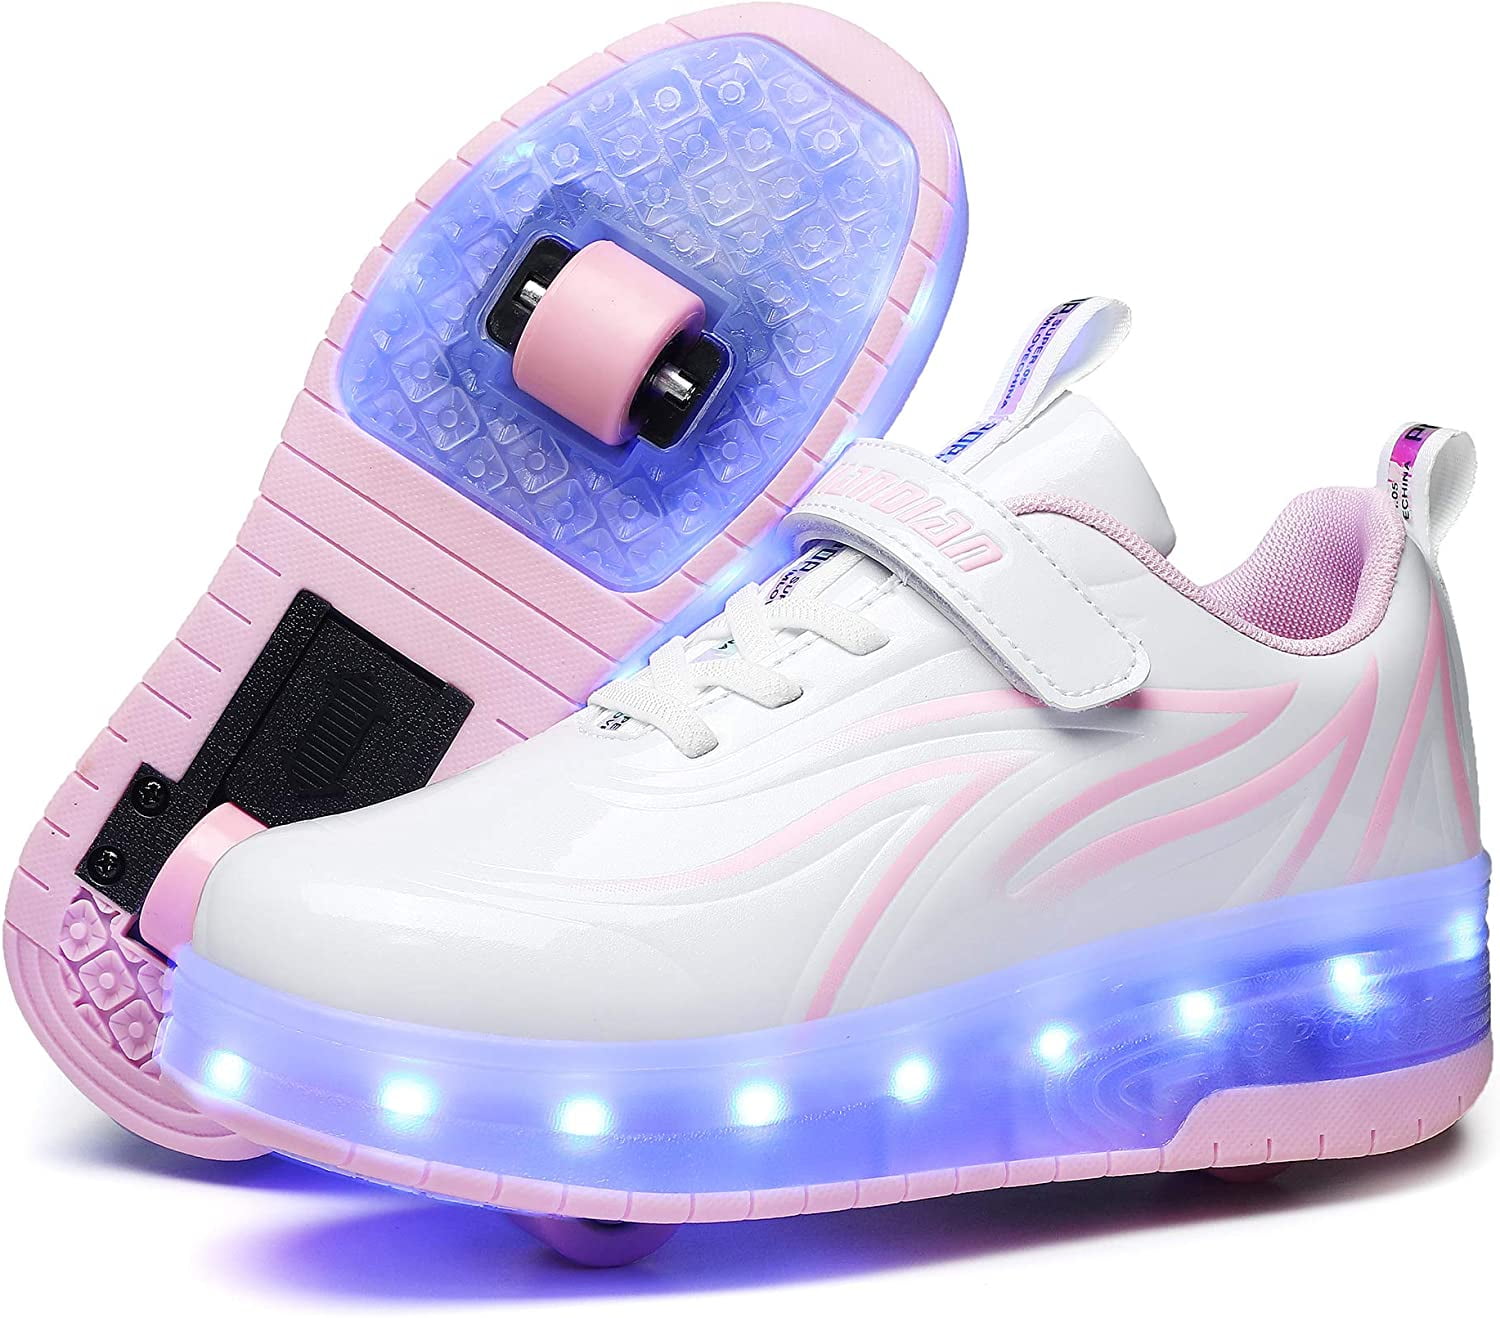 Gooi hardop Zuiver OALSI Kids Shoes with Wheels LED Light Color Shoes Shiny Roller Skates  Skate Shoes Simple Kids Gifts Boys Girls The Best Gift for Party Birthday  Christmas Day - Walmart.com